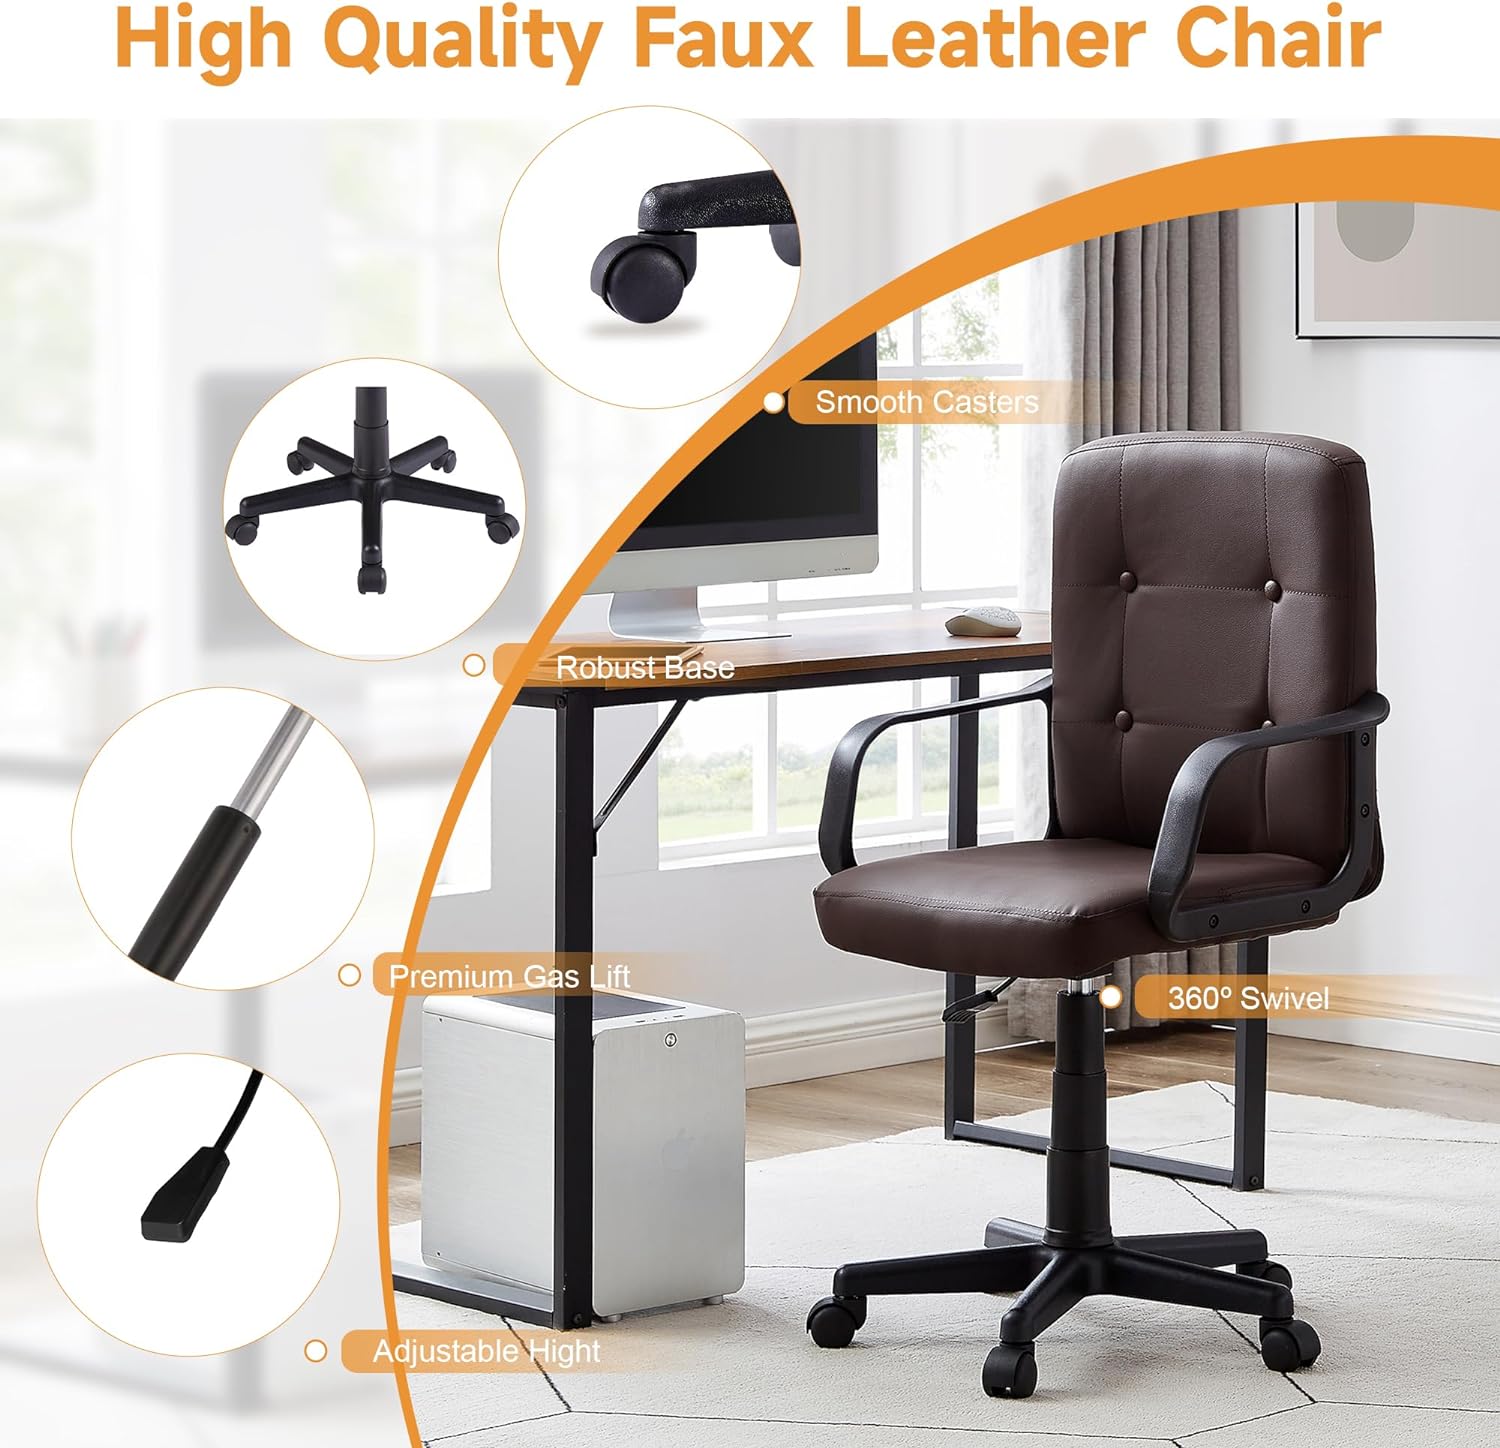 VECELO Home Office Desk Chair with Armrests,Mid Back Adjustable Height